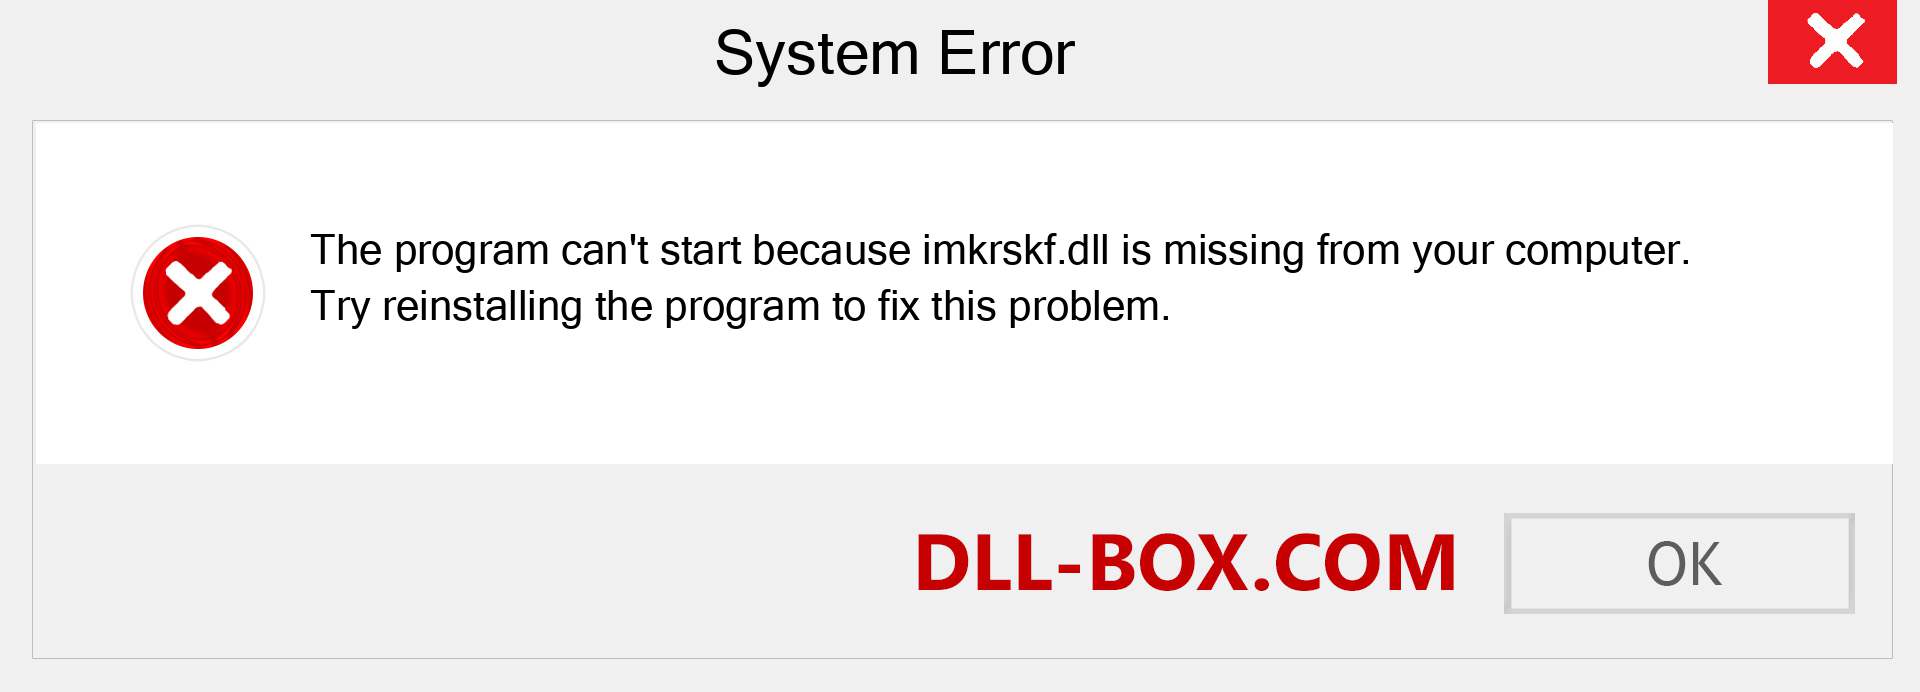  imkrskf.dll file is missing?. Download for Windows 7, 8, 10 - Fix  imkrskf dll Missing Error on Windows, photos, images